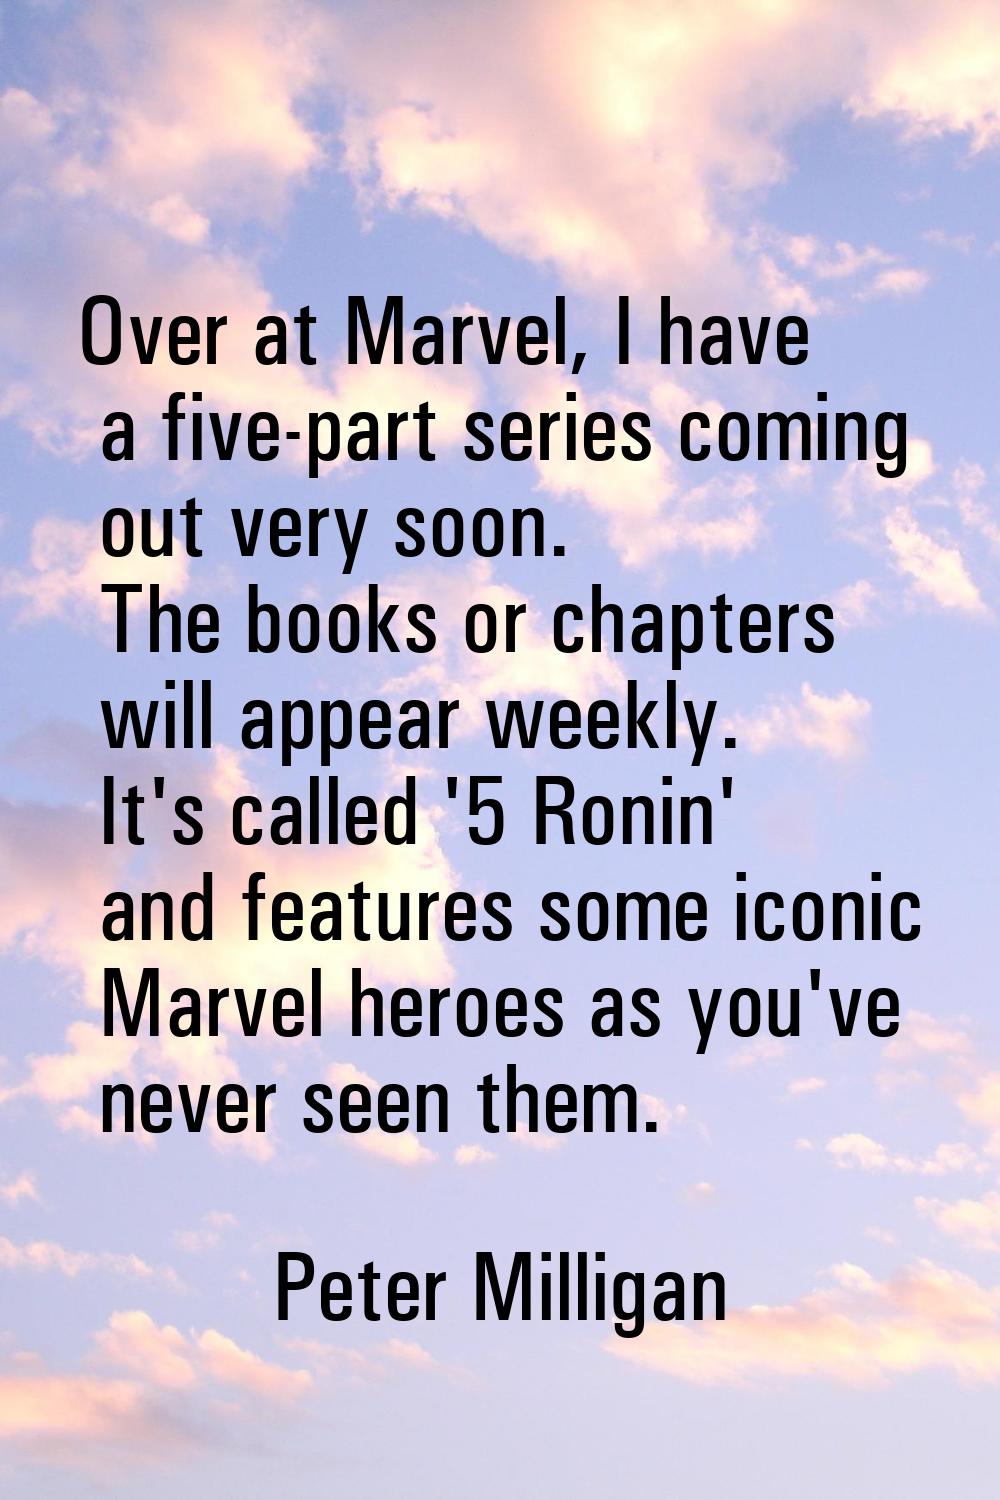 Over at Marvel, I have a five-part series coming out very soon. The books or chapters will appear w